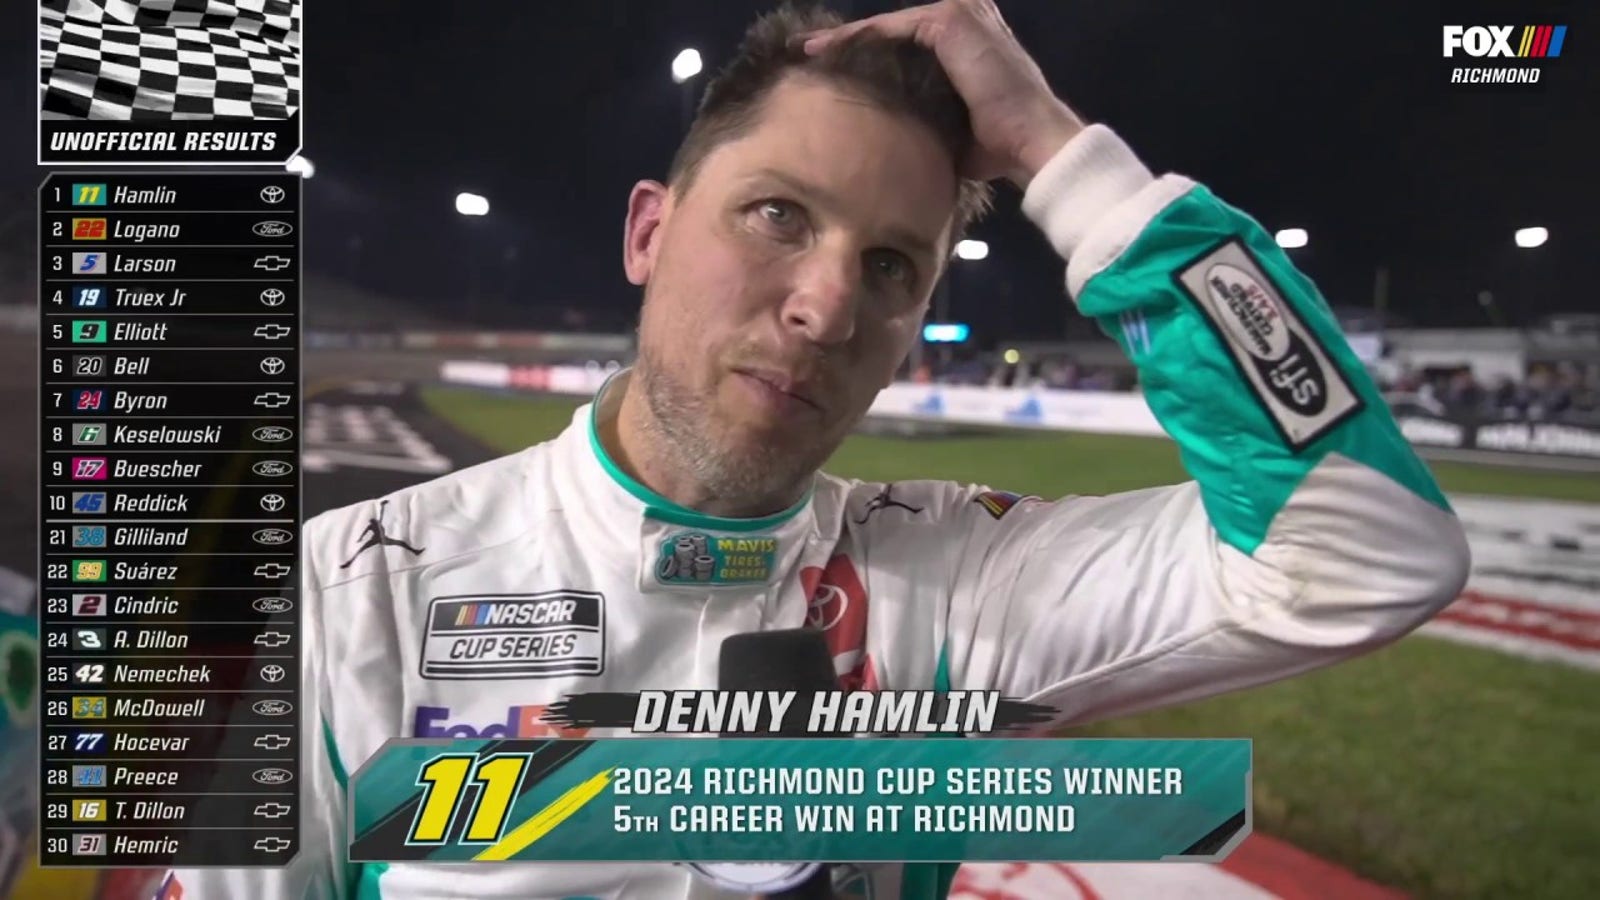 'This is a team win for sure' - Denny Hamlin after his fifth career win at Richmond 